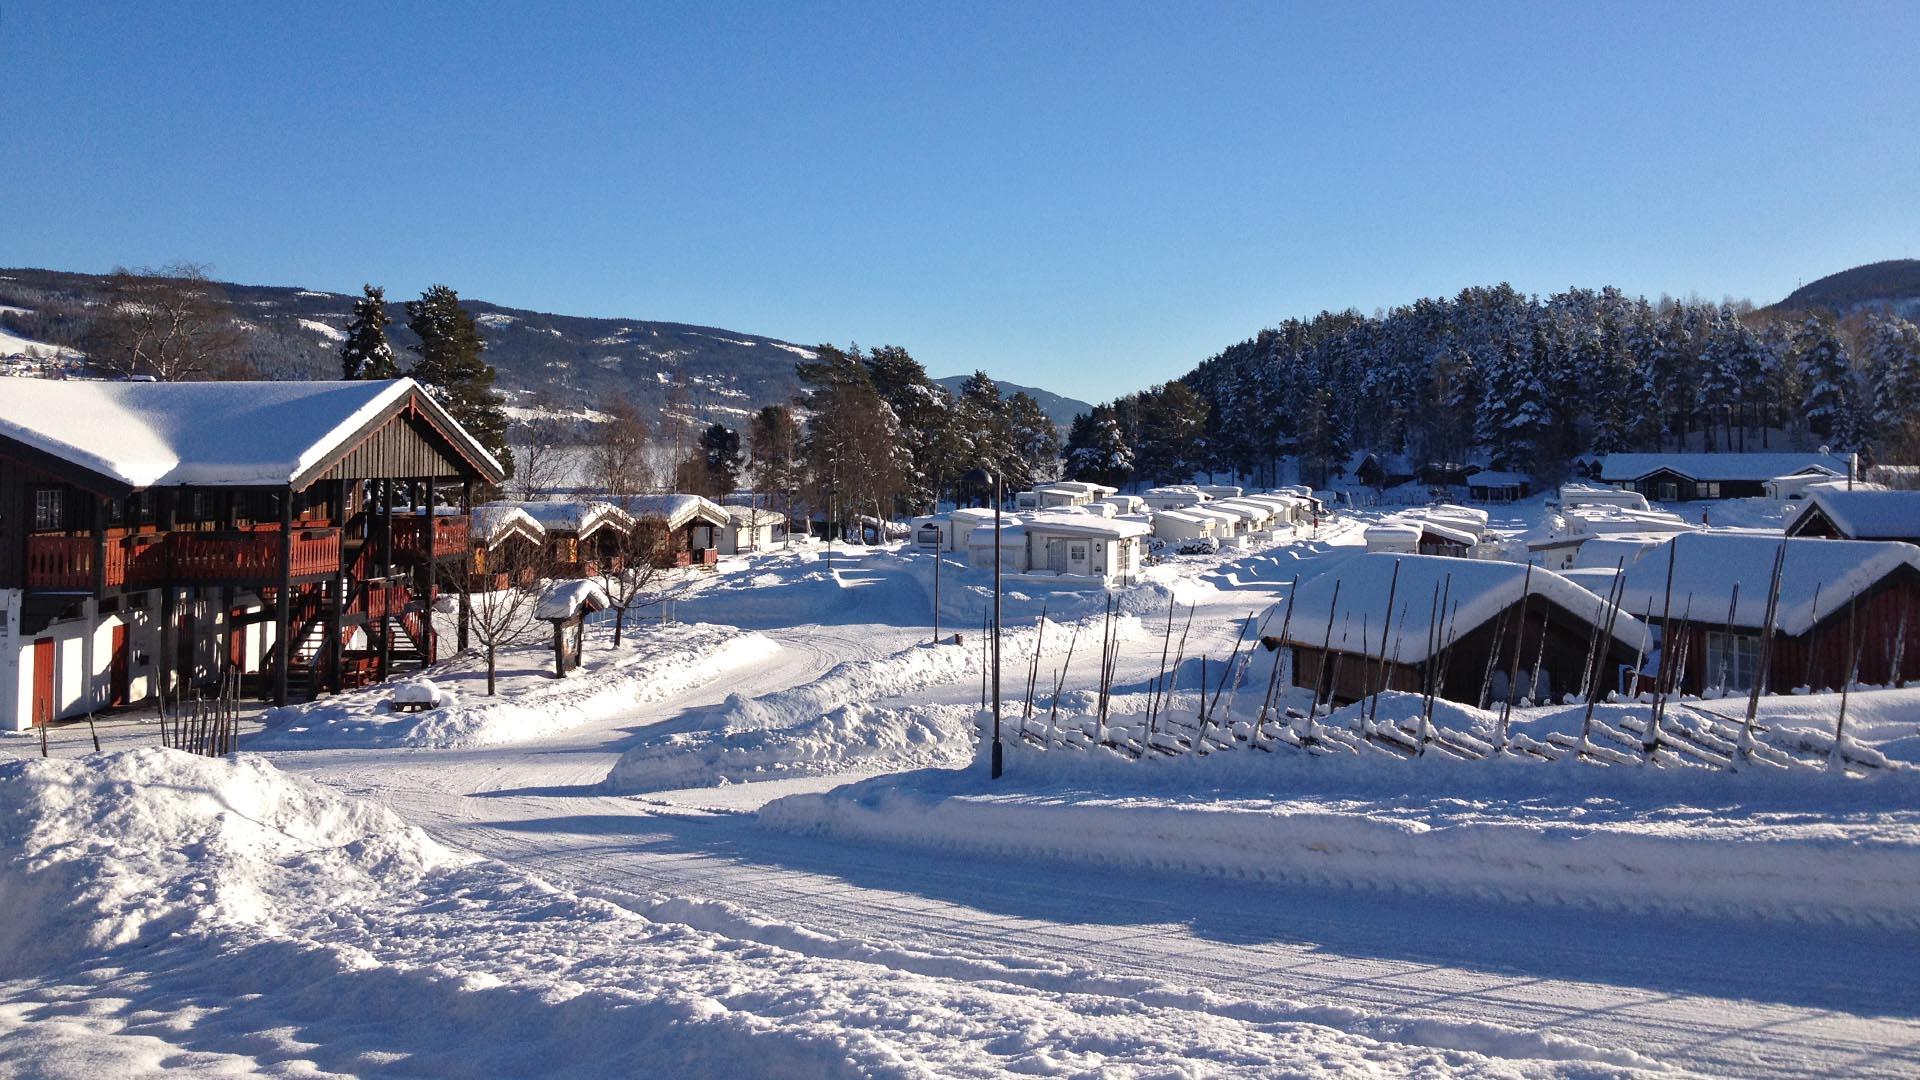 Main building and some rental cabins a nice winters day at Fagernes Camping